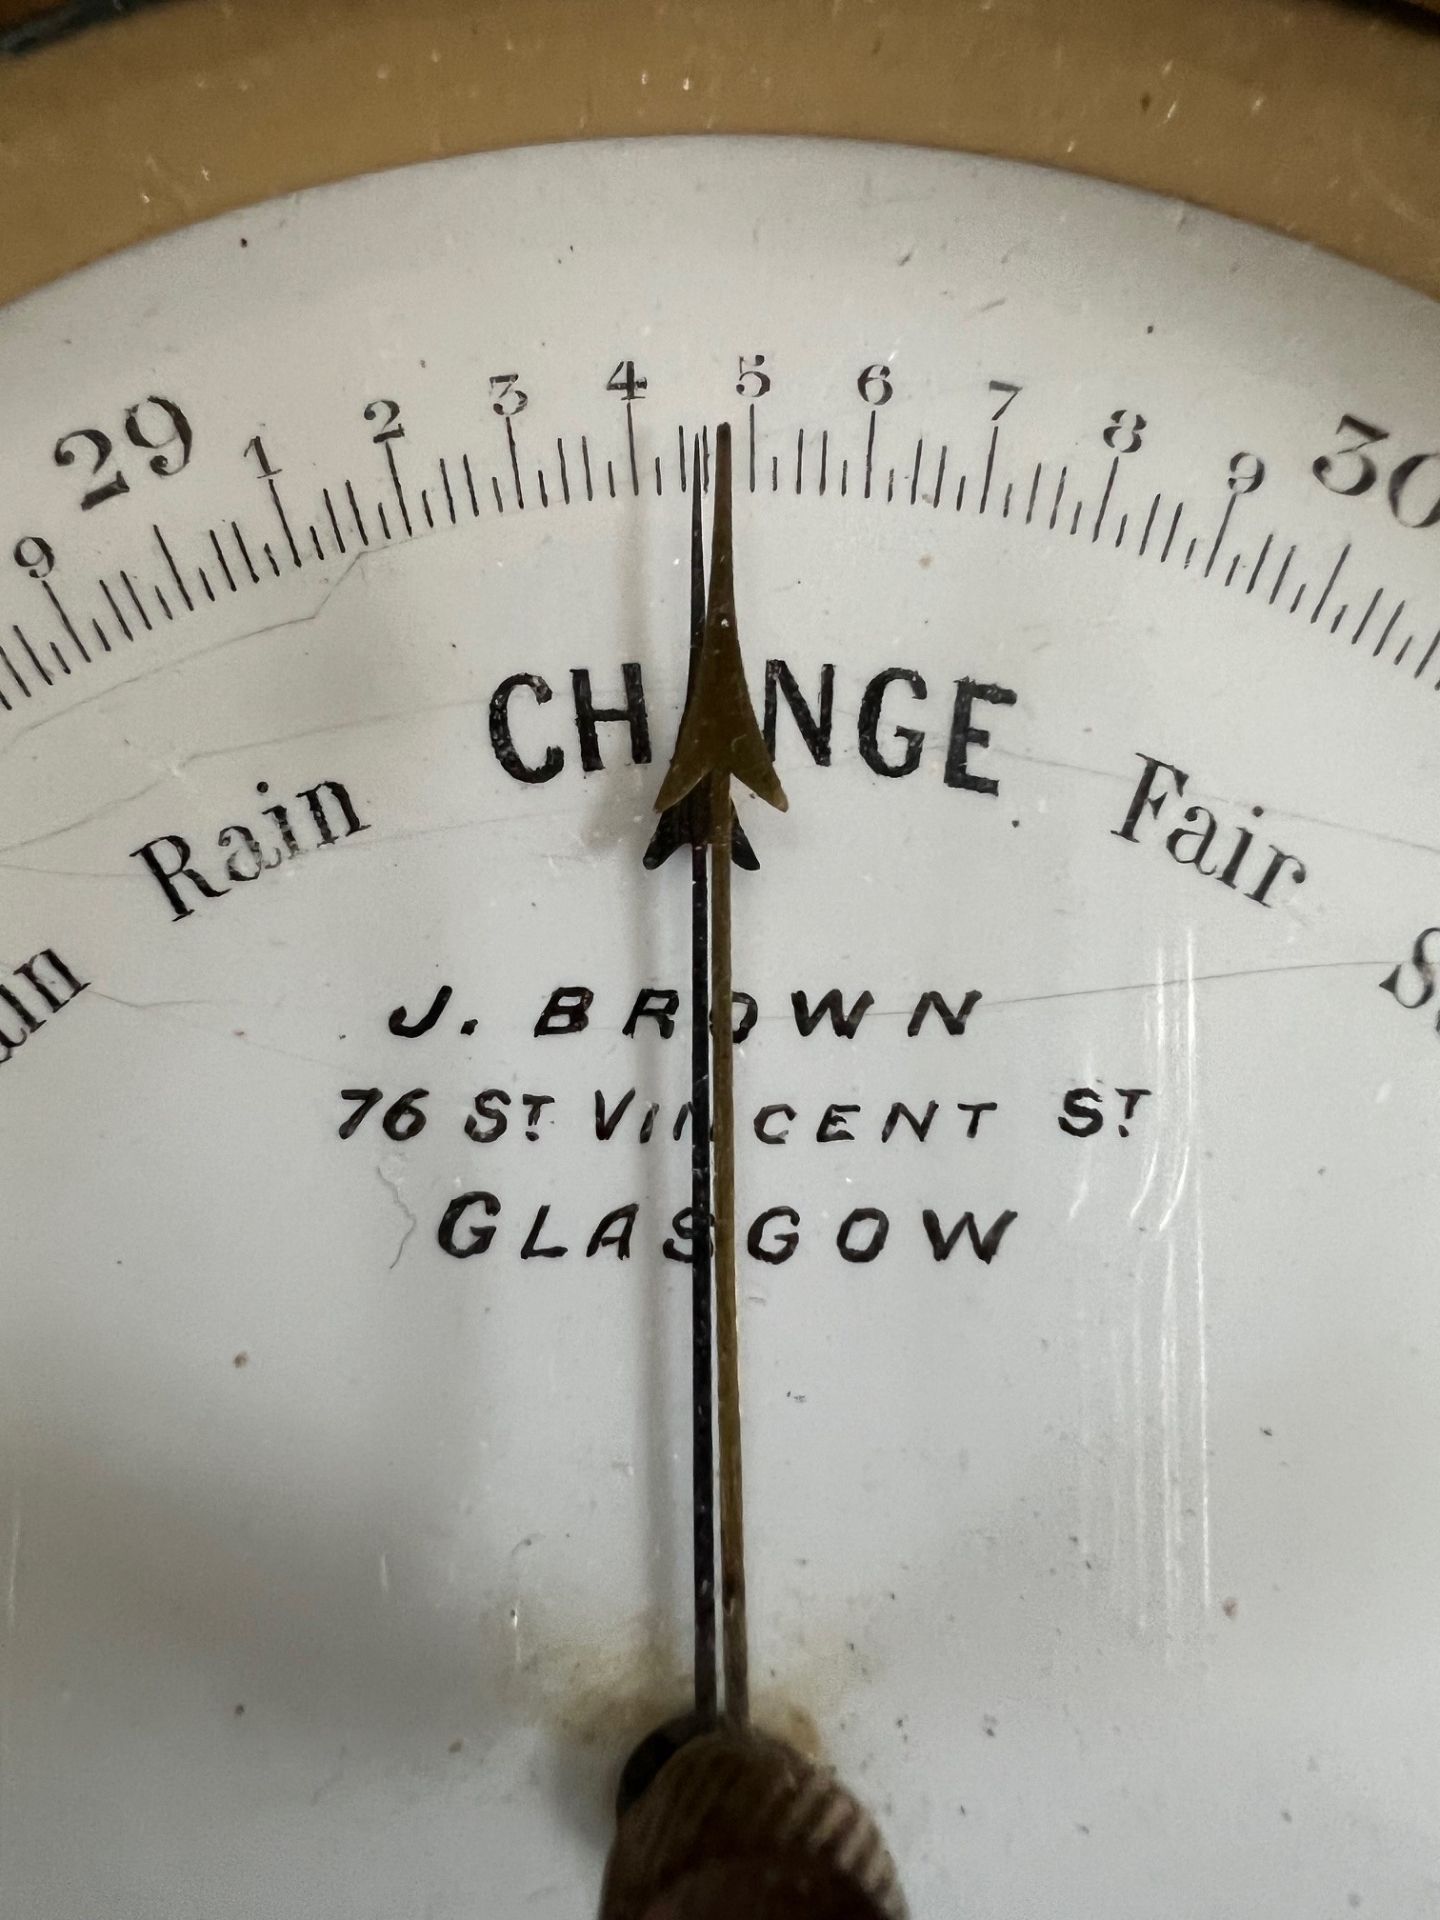 BRASS CASED HOLOSTERIC BAROMETER, J BROWN, 76 VINCENT ST, GLASGOW, DIAMETER APPROX 12.25cm AND DEPTH - Image 3 of 3